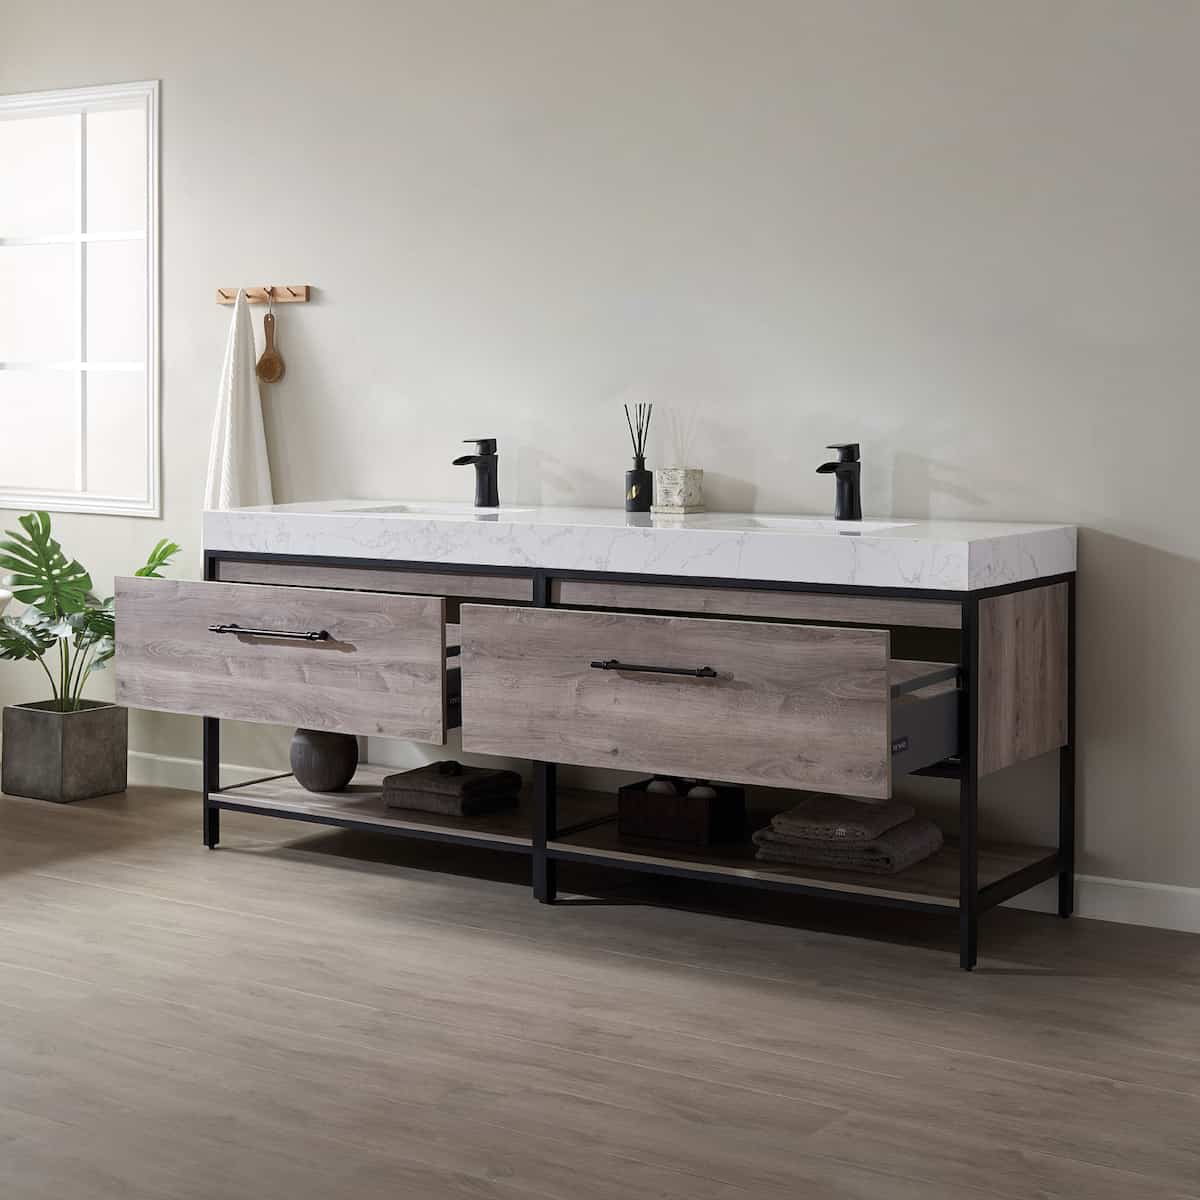 Vinnova Palma 84 Inch Freestanding Double Vanity in Mexican Oak with White Composite Grain Stone Countertop Without Mirrors Drawers 701284-MXO-GW-NM